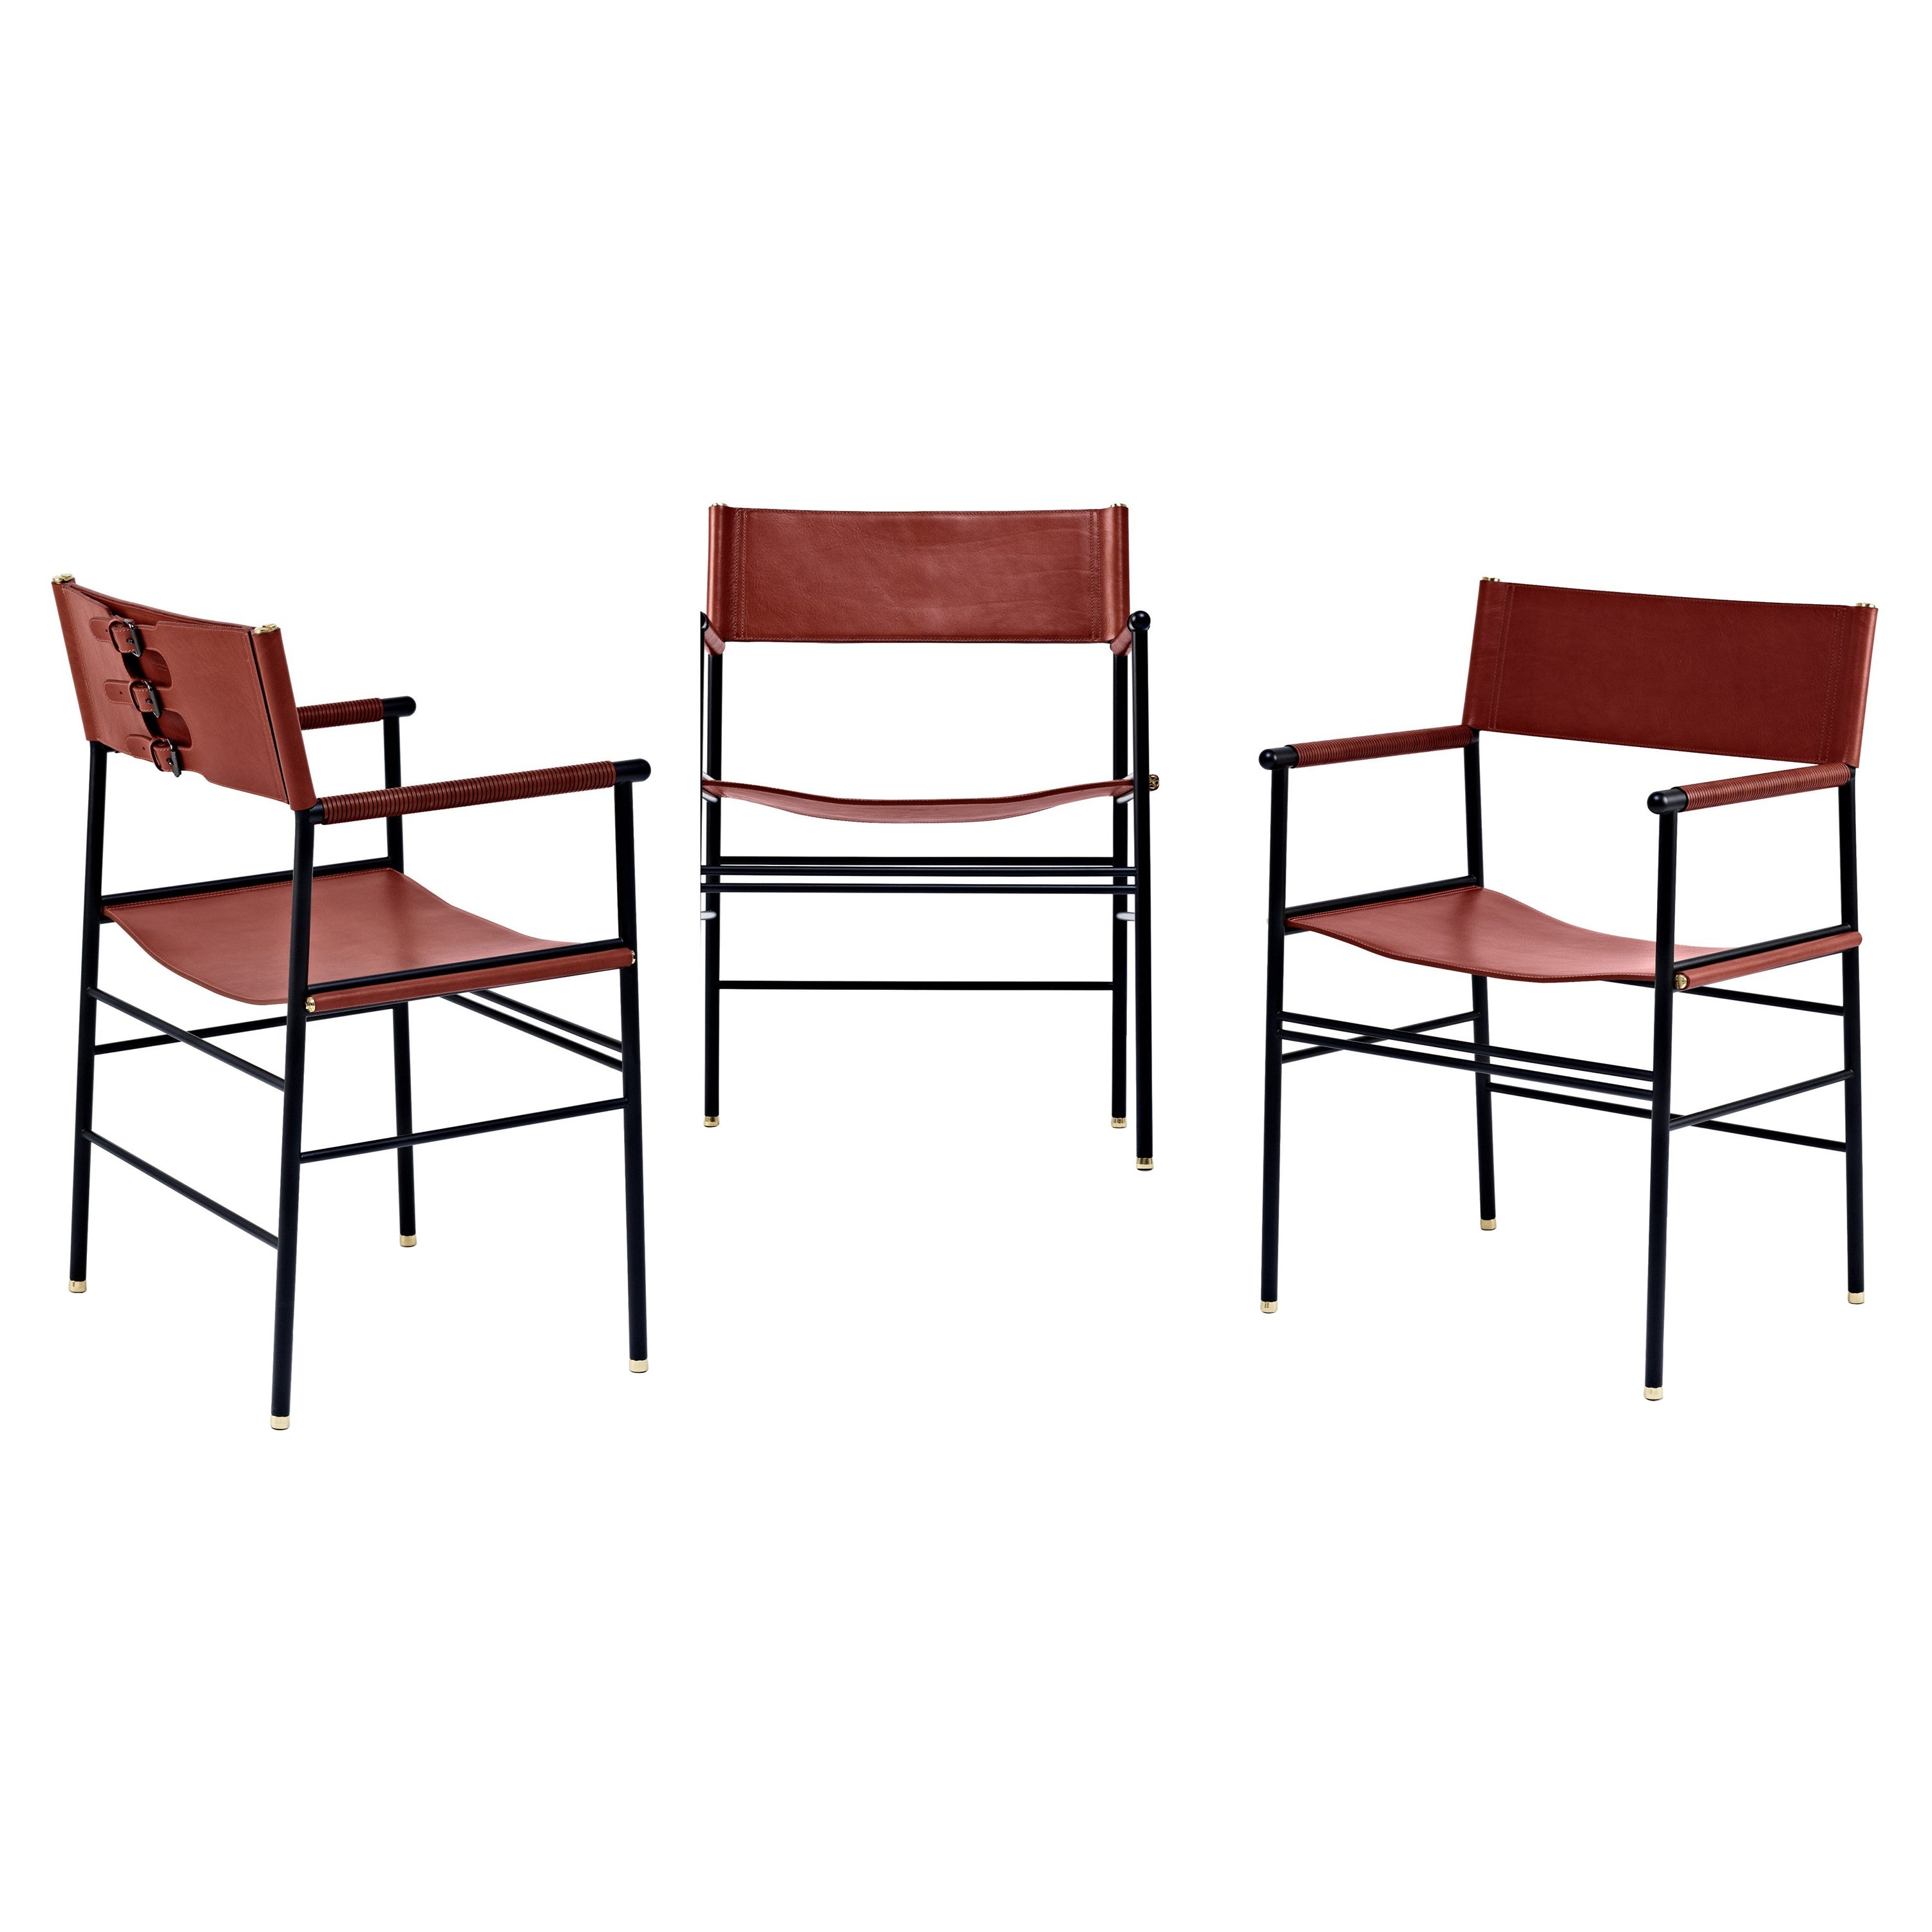 Set of 3 Handcraft Contemporary Armchair Cognac Leather & Black Rubbered Metal